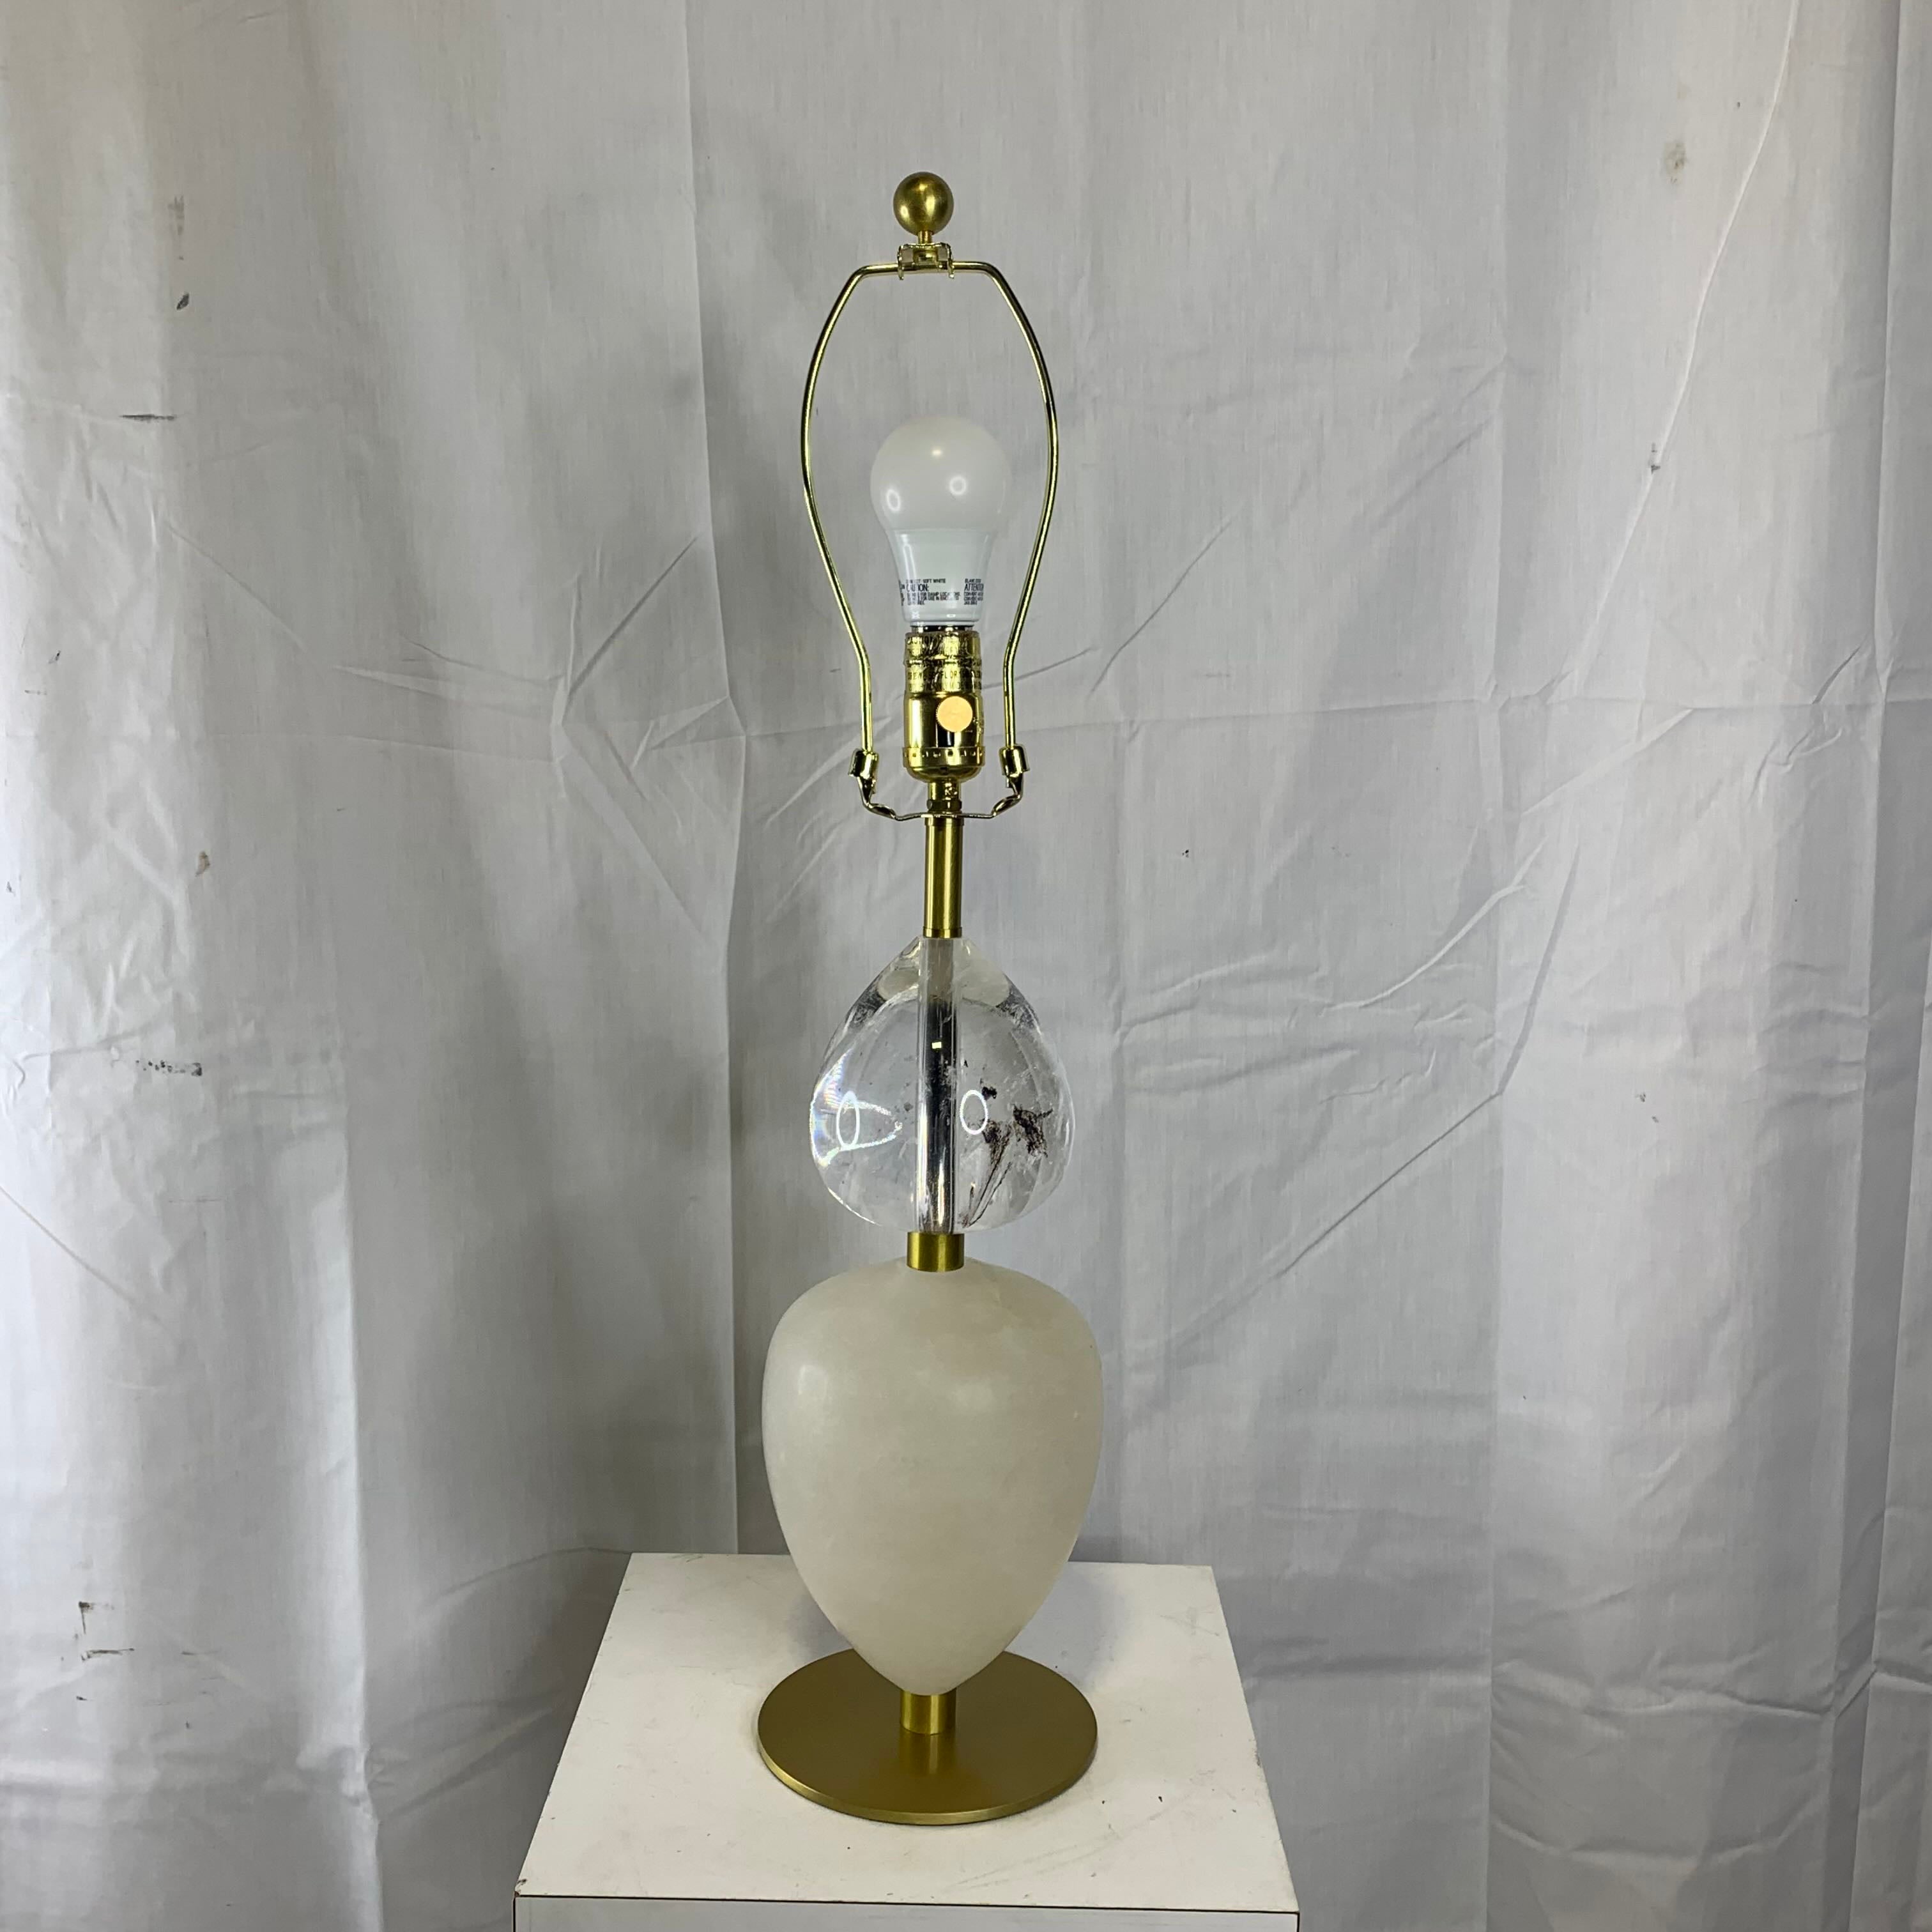 6" Diameter x 27" Arteriors Aubrey Antique Brass Finish with Opal Swirl Crystal and Snow Marble Table Lamp